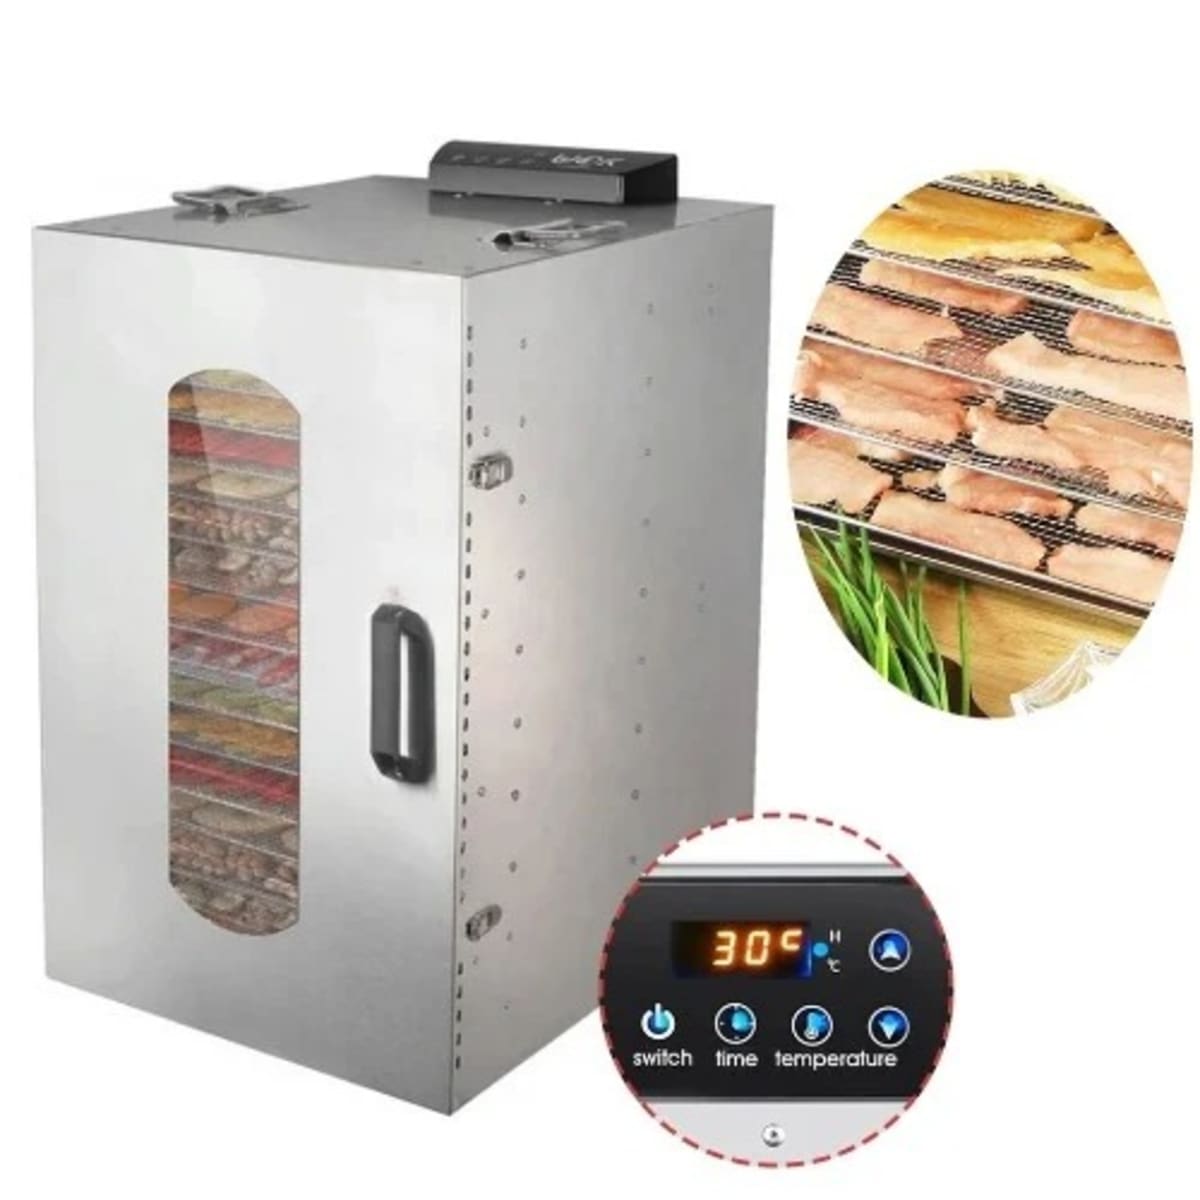 20 Trays Commercial Food Dehydrators Machine 1500W Food Dryer for